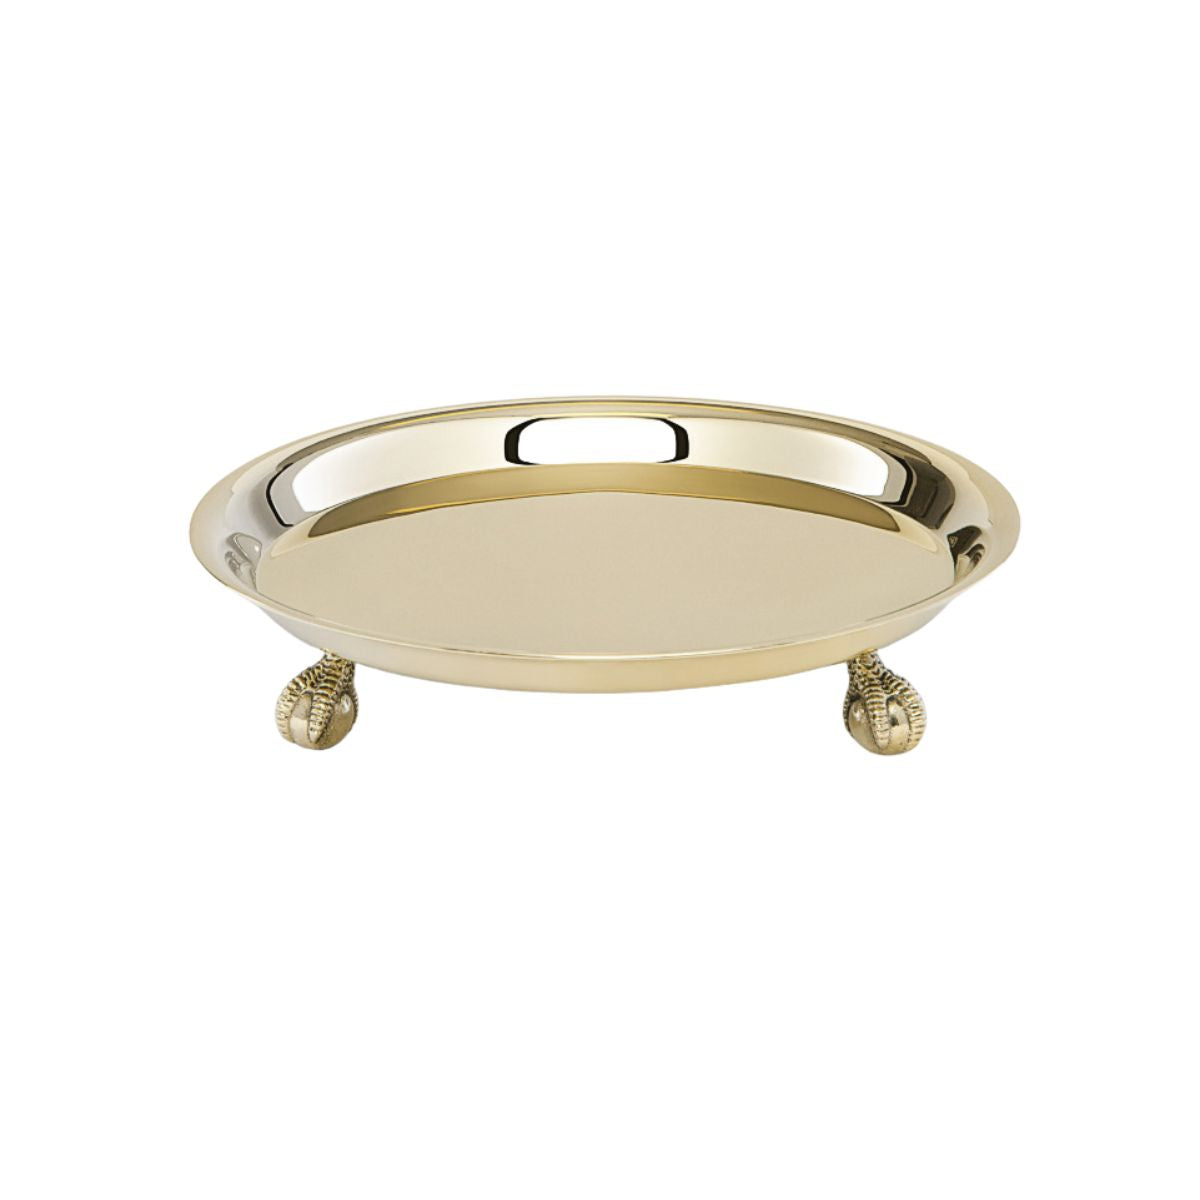 Clawfooted Brass Tray